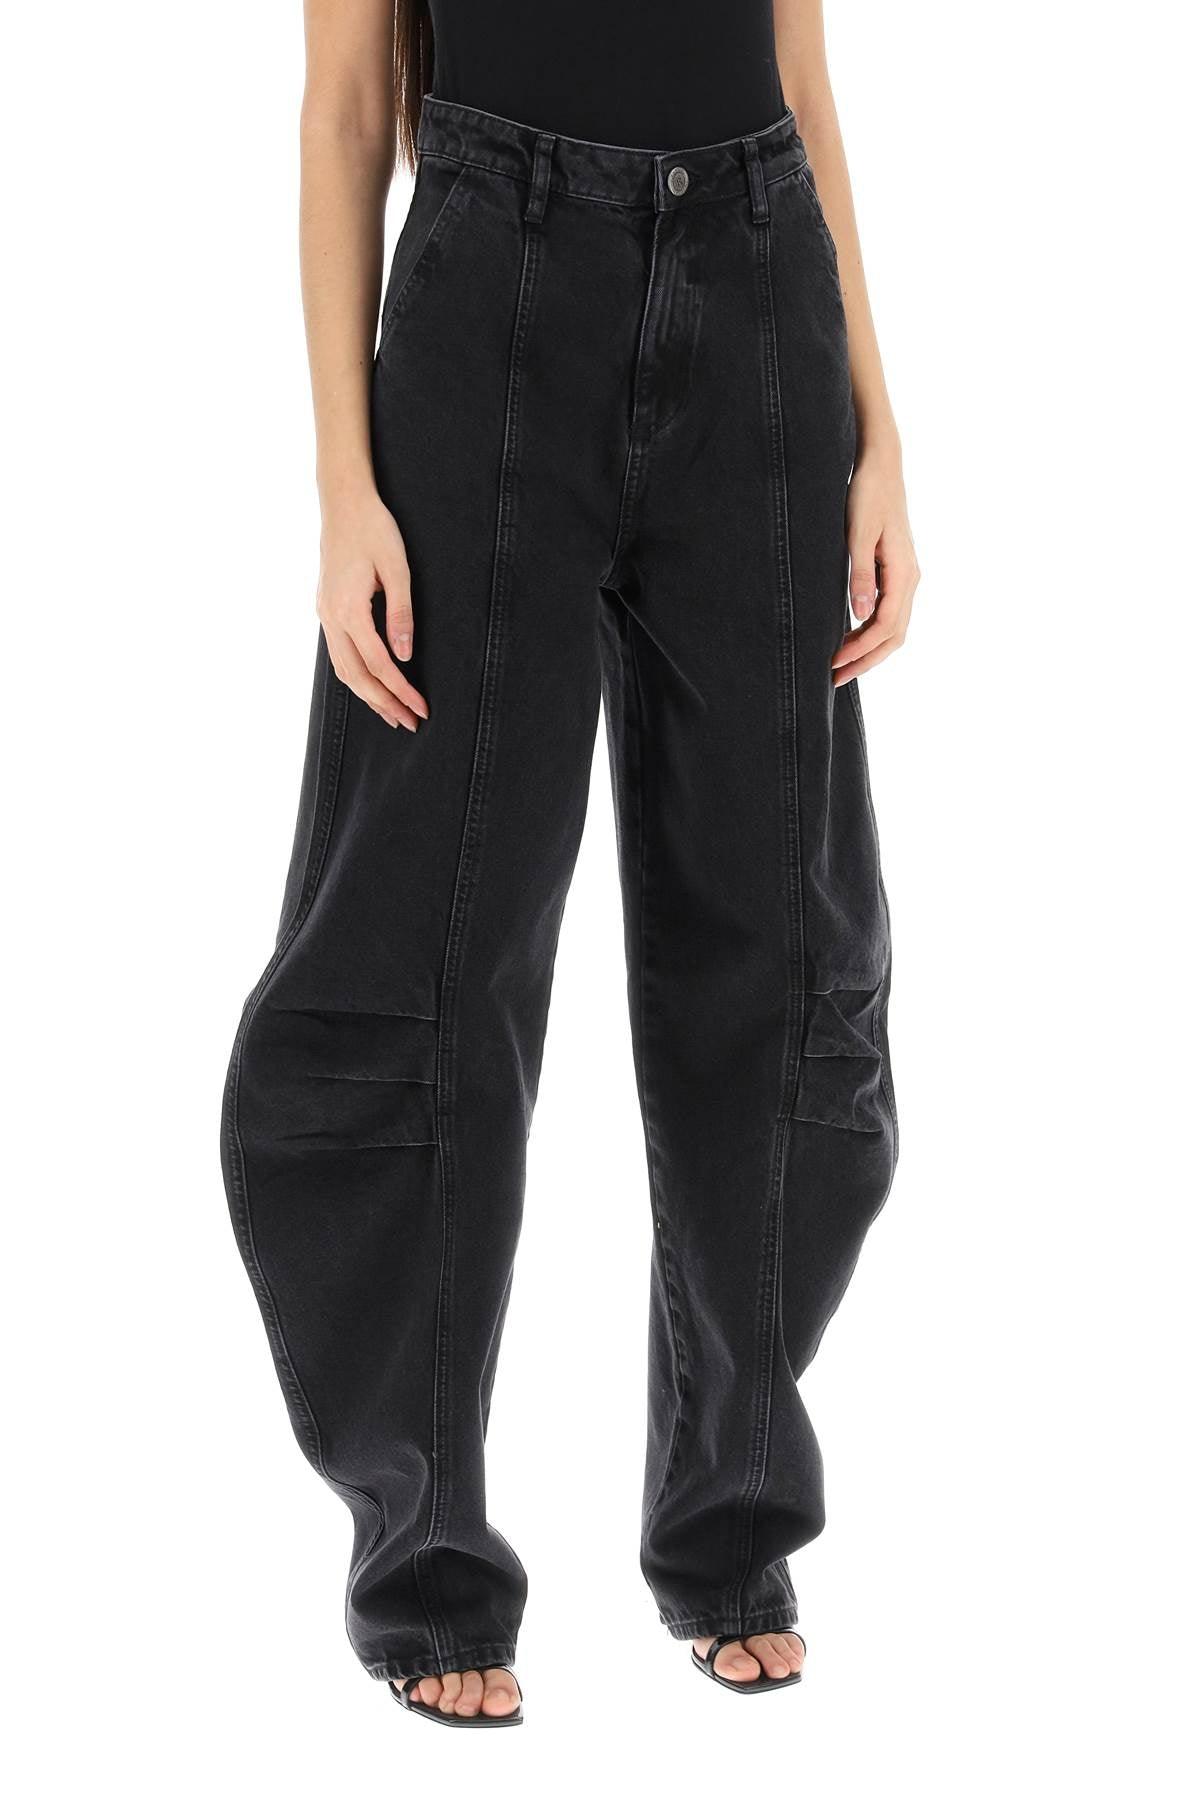 Rotate Baggy Jeans With Curved Leg - JOHN JULIA